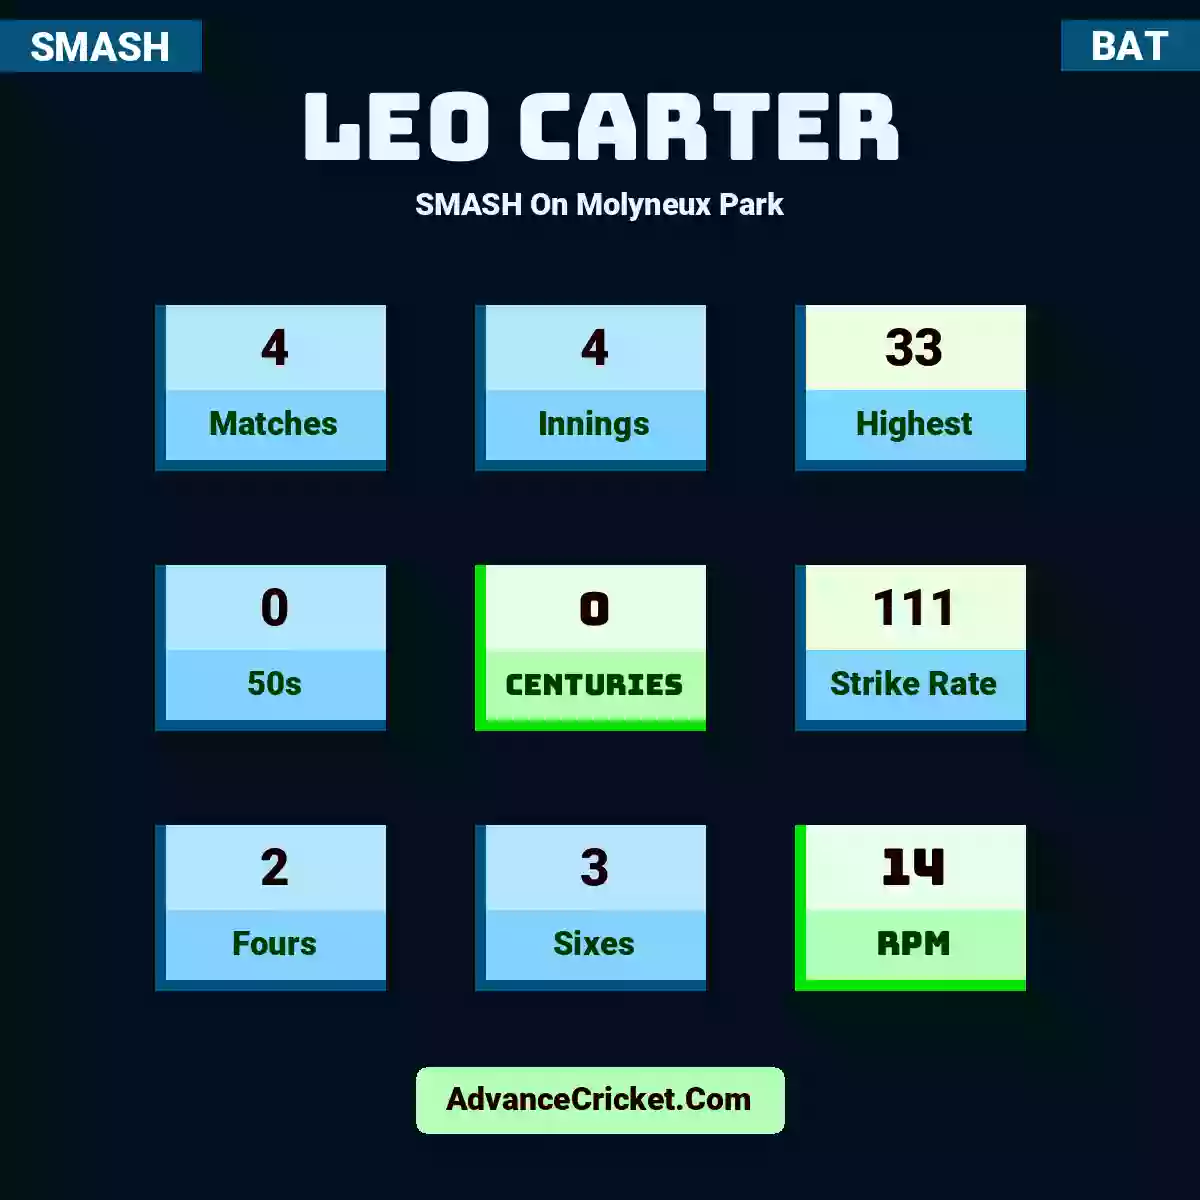 Leo Carter SMASH  On Molyneux Park, Leo Carter played 4 matches, scored 33 runs as highest, 0 half-centuries, and 0 centuries, with a strike rate of 111. L.Carter hit 2 fours and 3 sixes, with an RPM of 14.